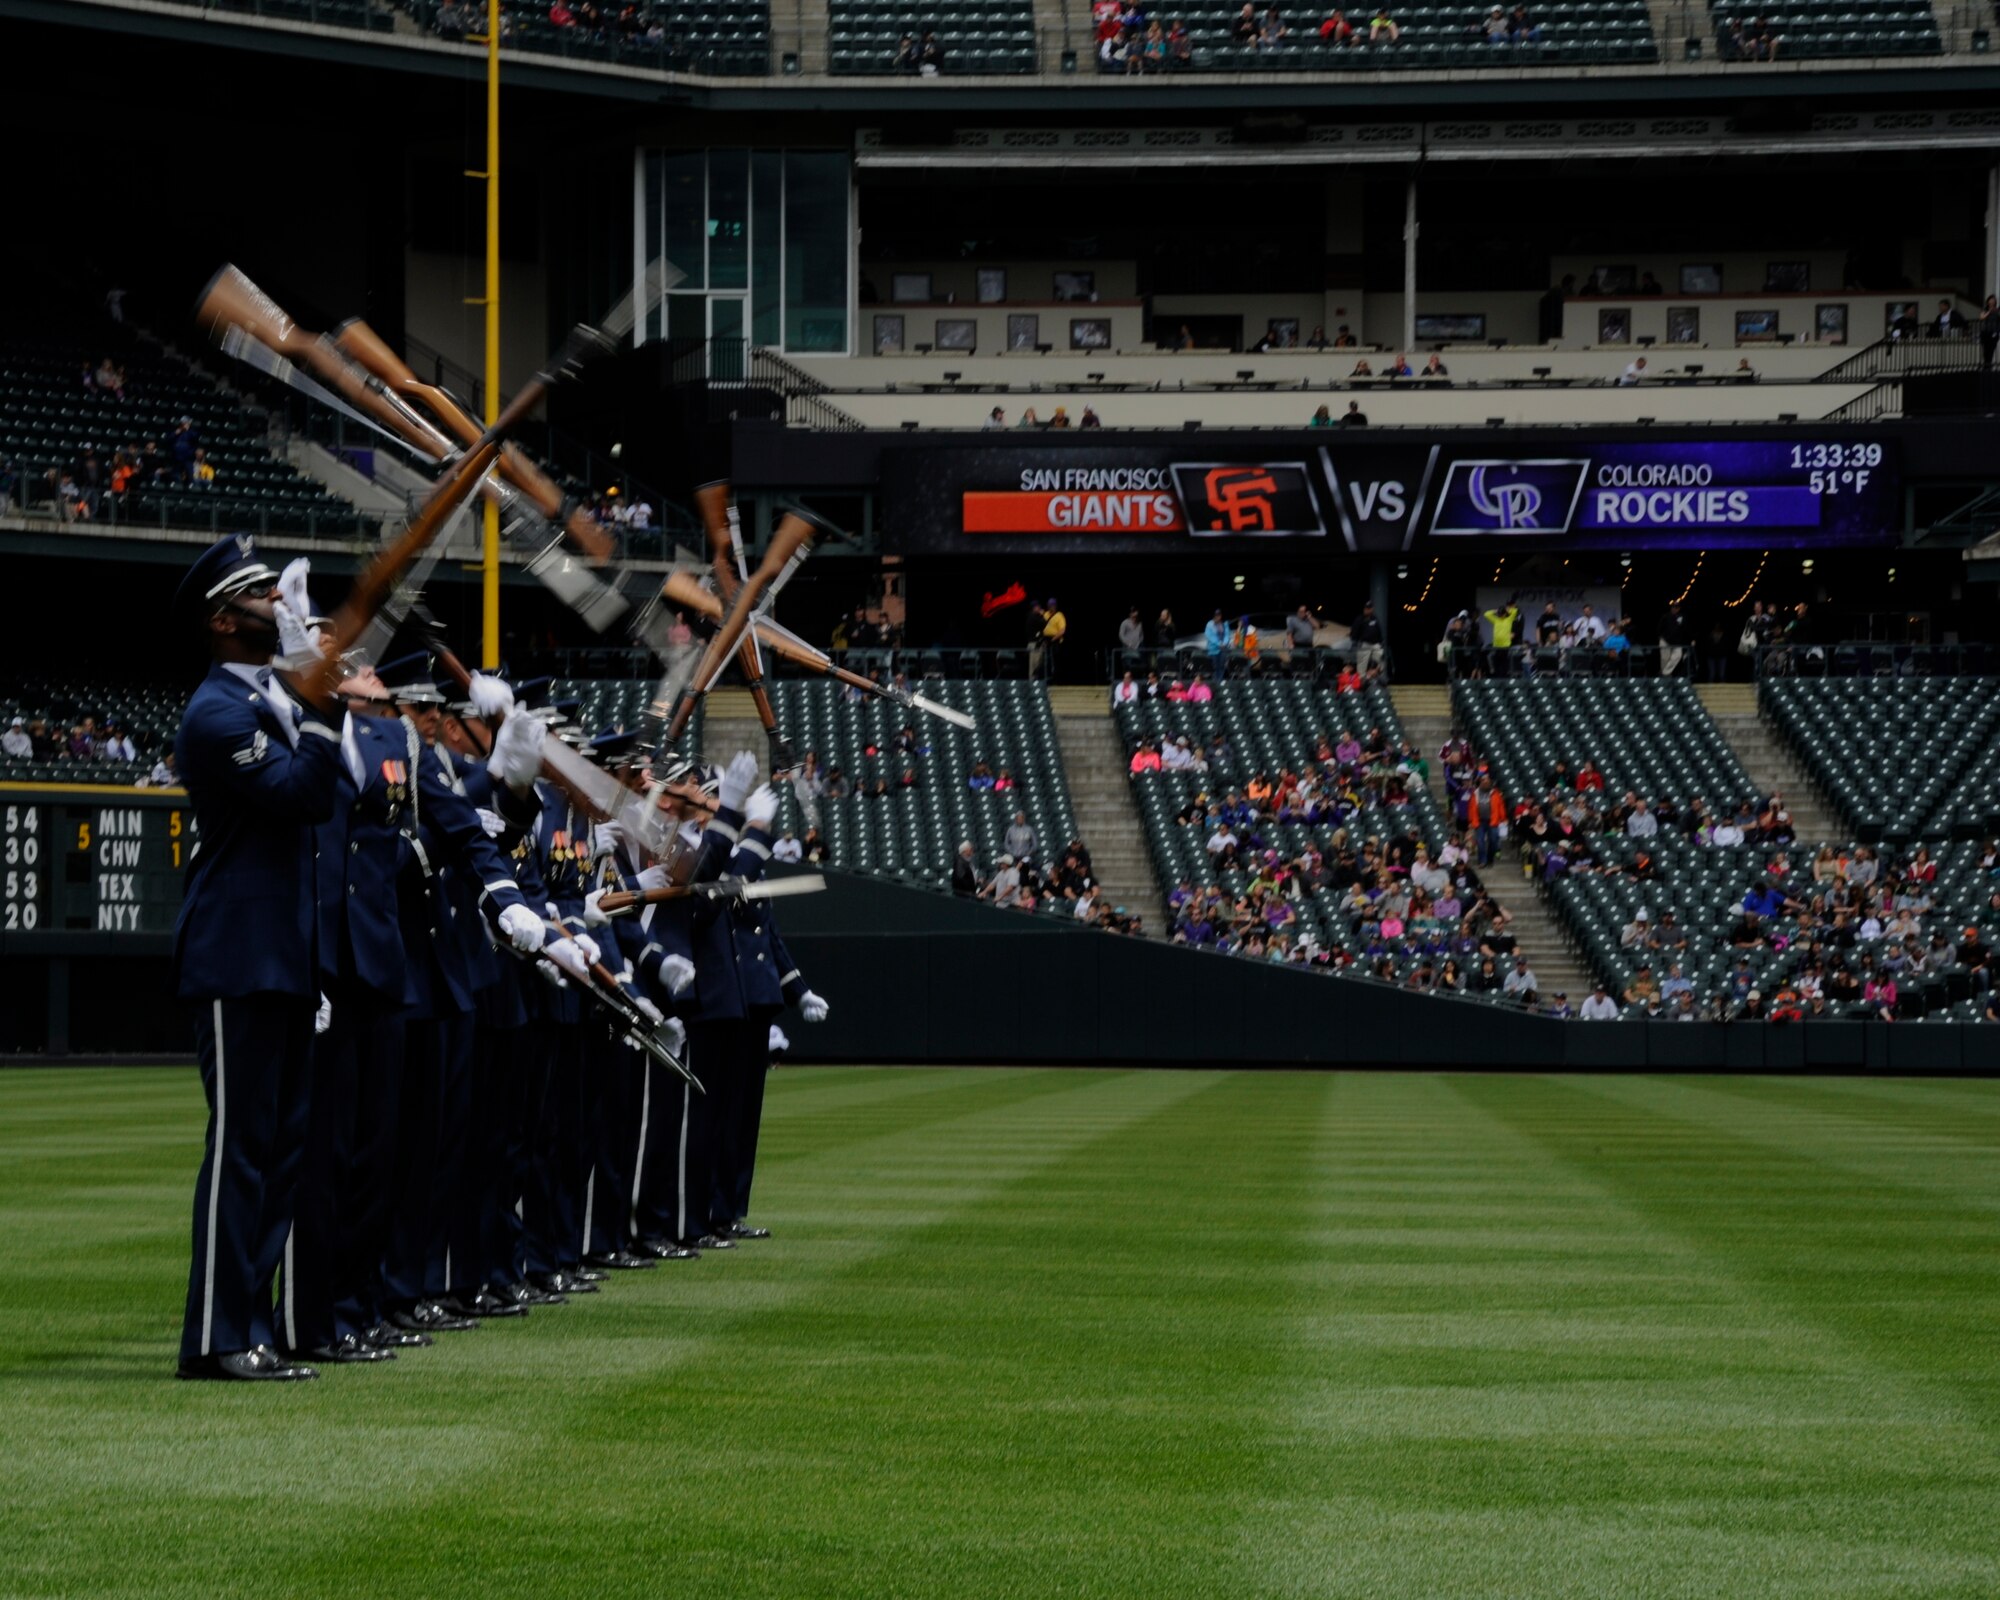 The United States Air Force Honor Guard Drill Team tosses their M-1 Garand rifles during a performance at a Colorado Rockies game against the San Francisco Giants at Coors Field in Denver, Colo., May 24, 2015. The Drill Team promotes the Air Force mission by showcasing drill performances at public and military venues to recruit, retain and inspire Airmen. (U.S. Air Force photo by Senior Airman Preston Webb/RELEASED)